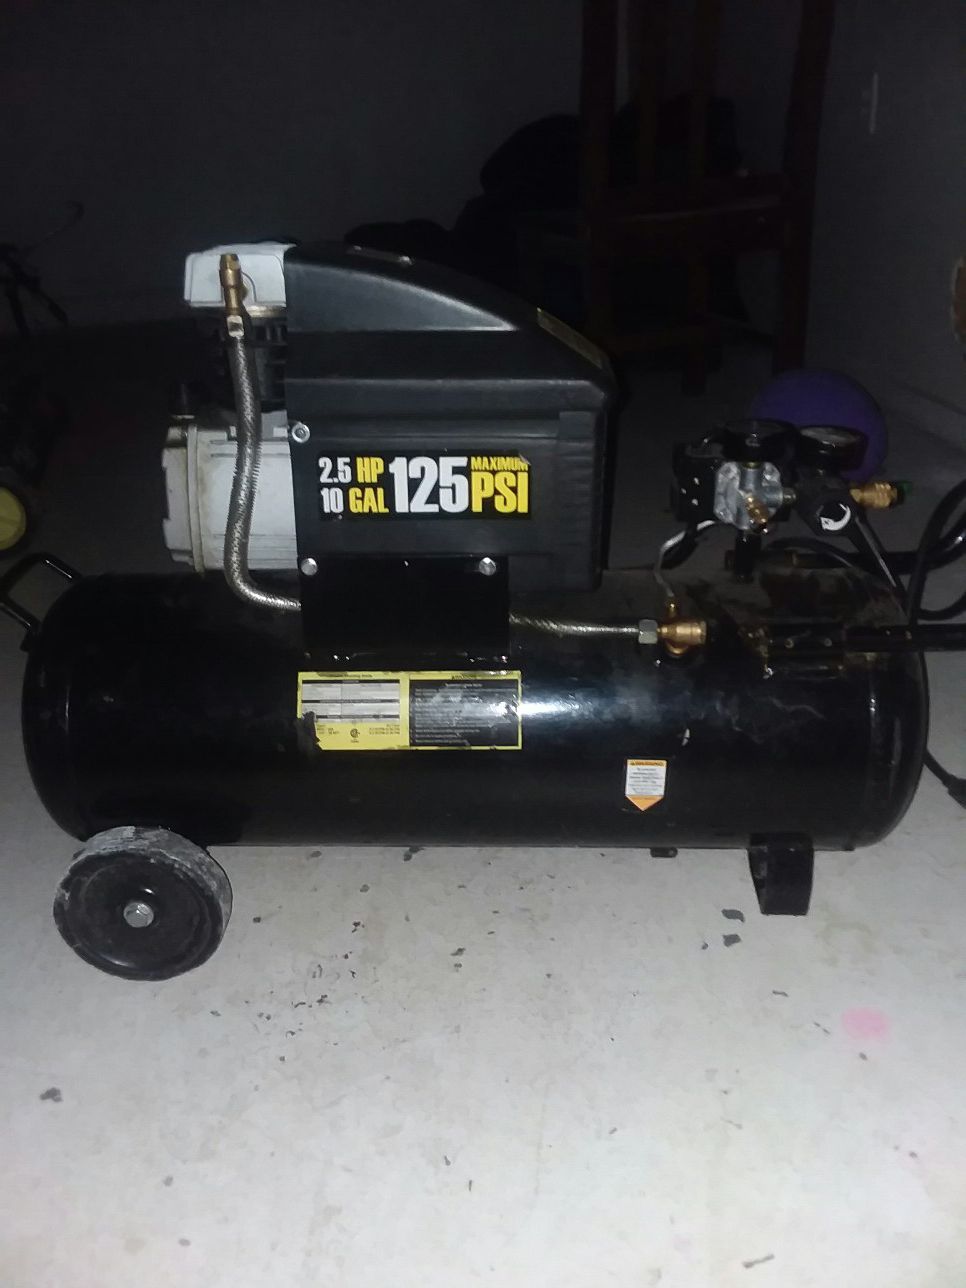 Light compressor 10 gallons in good condition